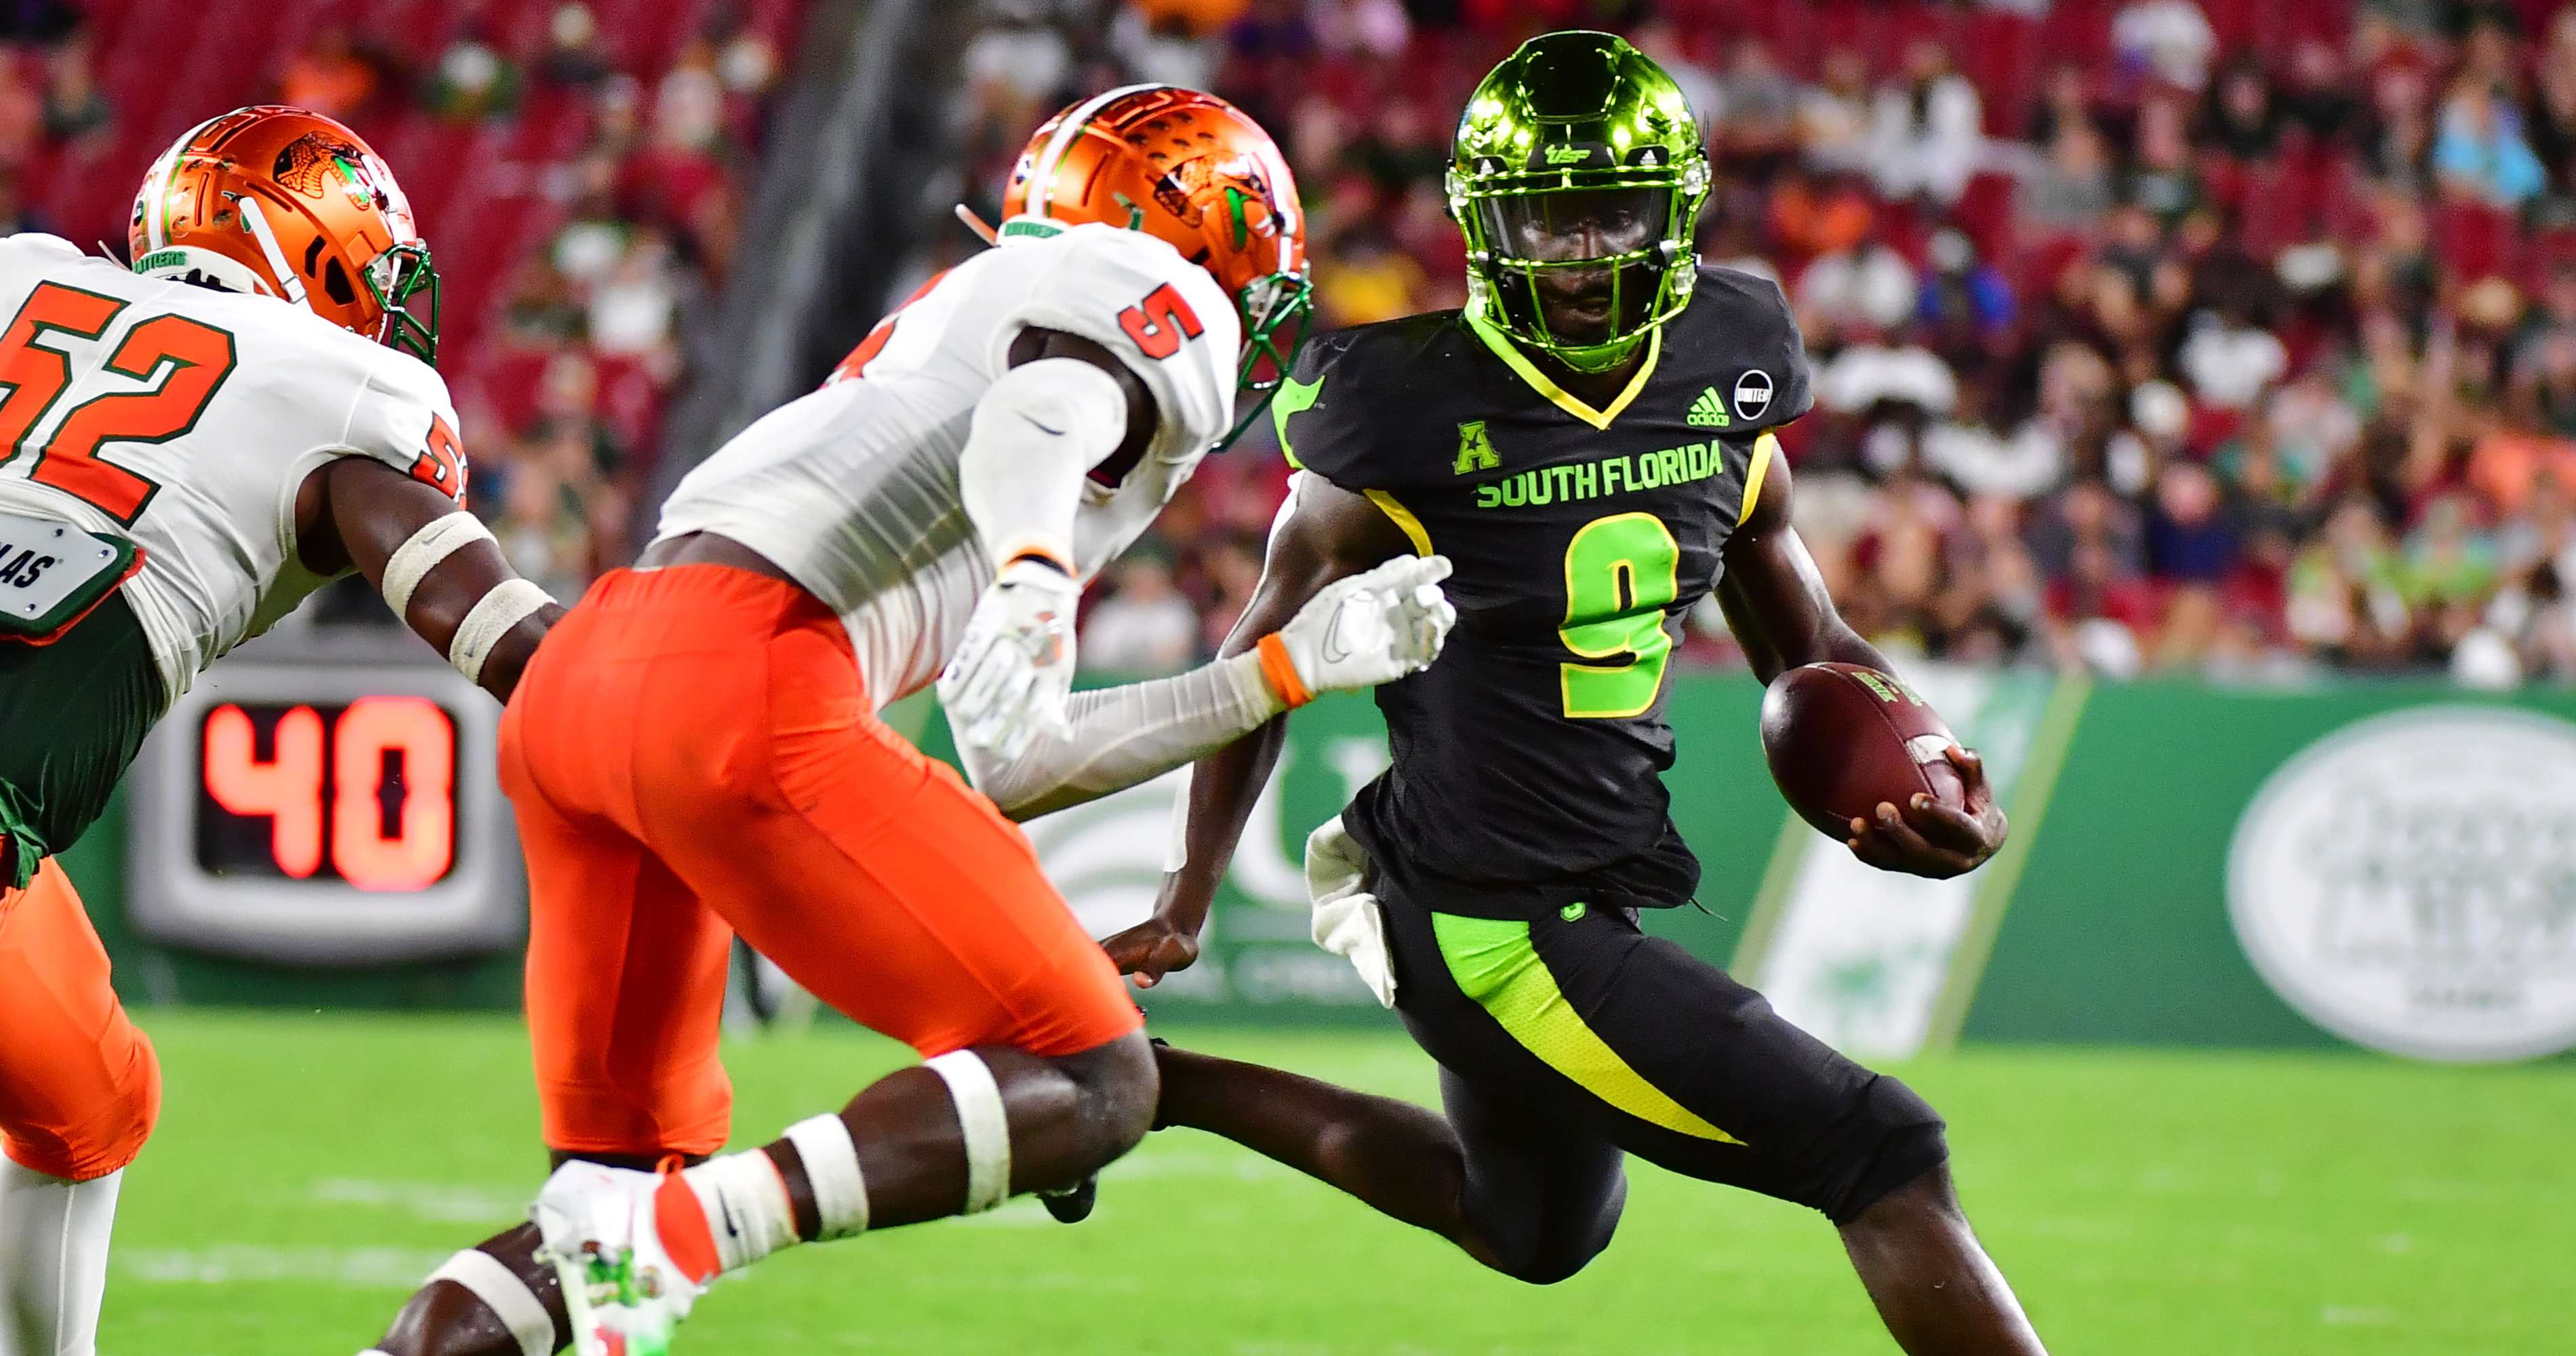 Mock NFL Draft projects Florida A&M safety Markquese Bell as